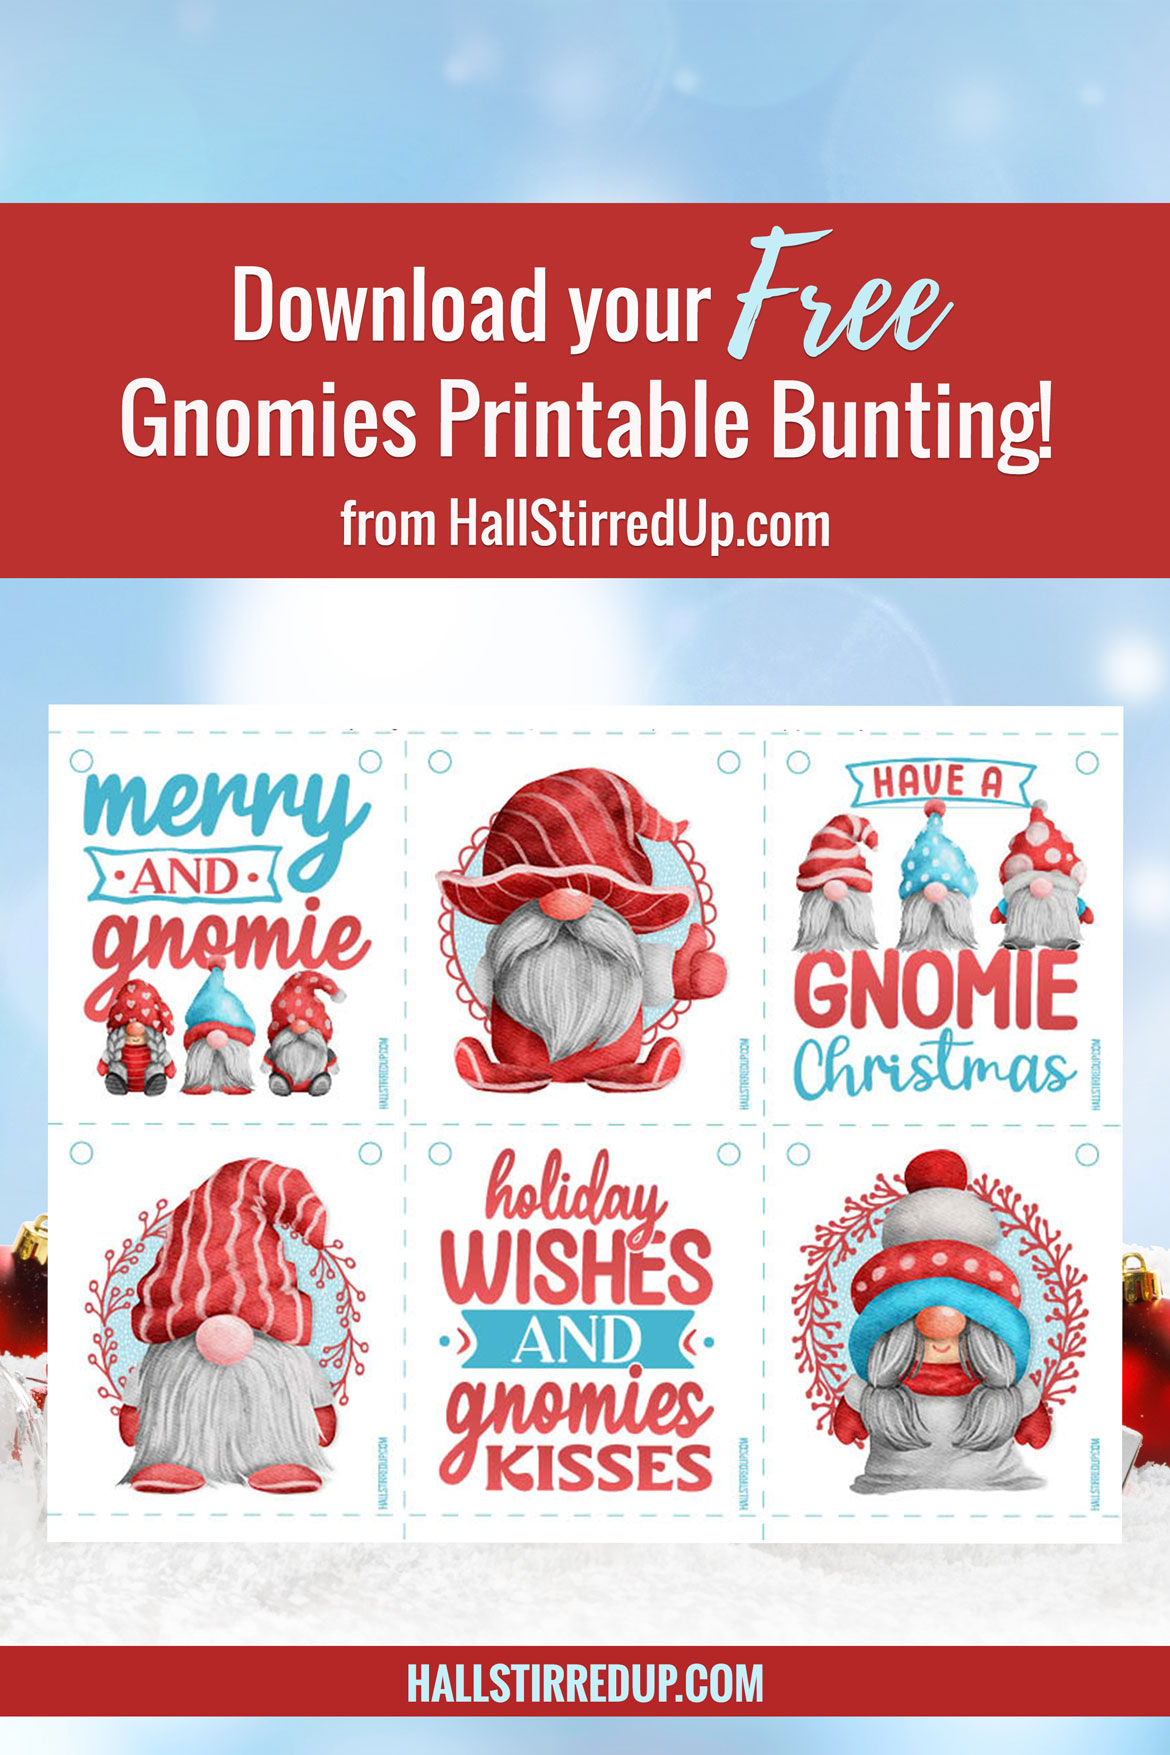 Celebrate with a free Gnomies printable bunting!